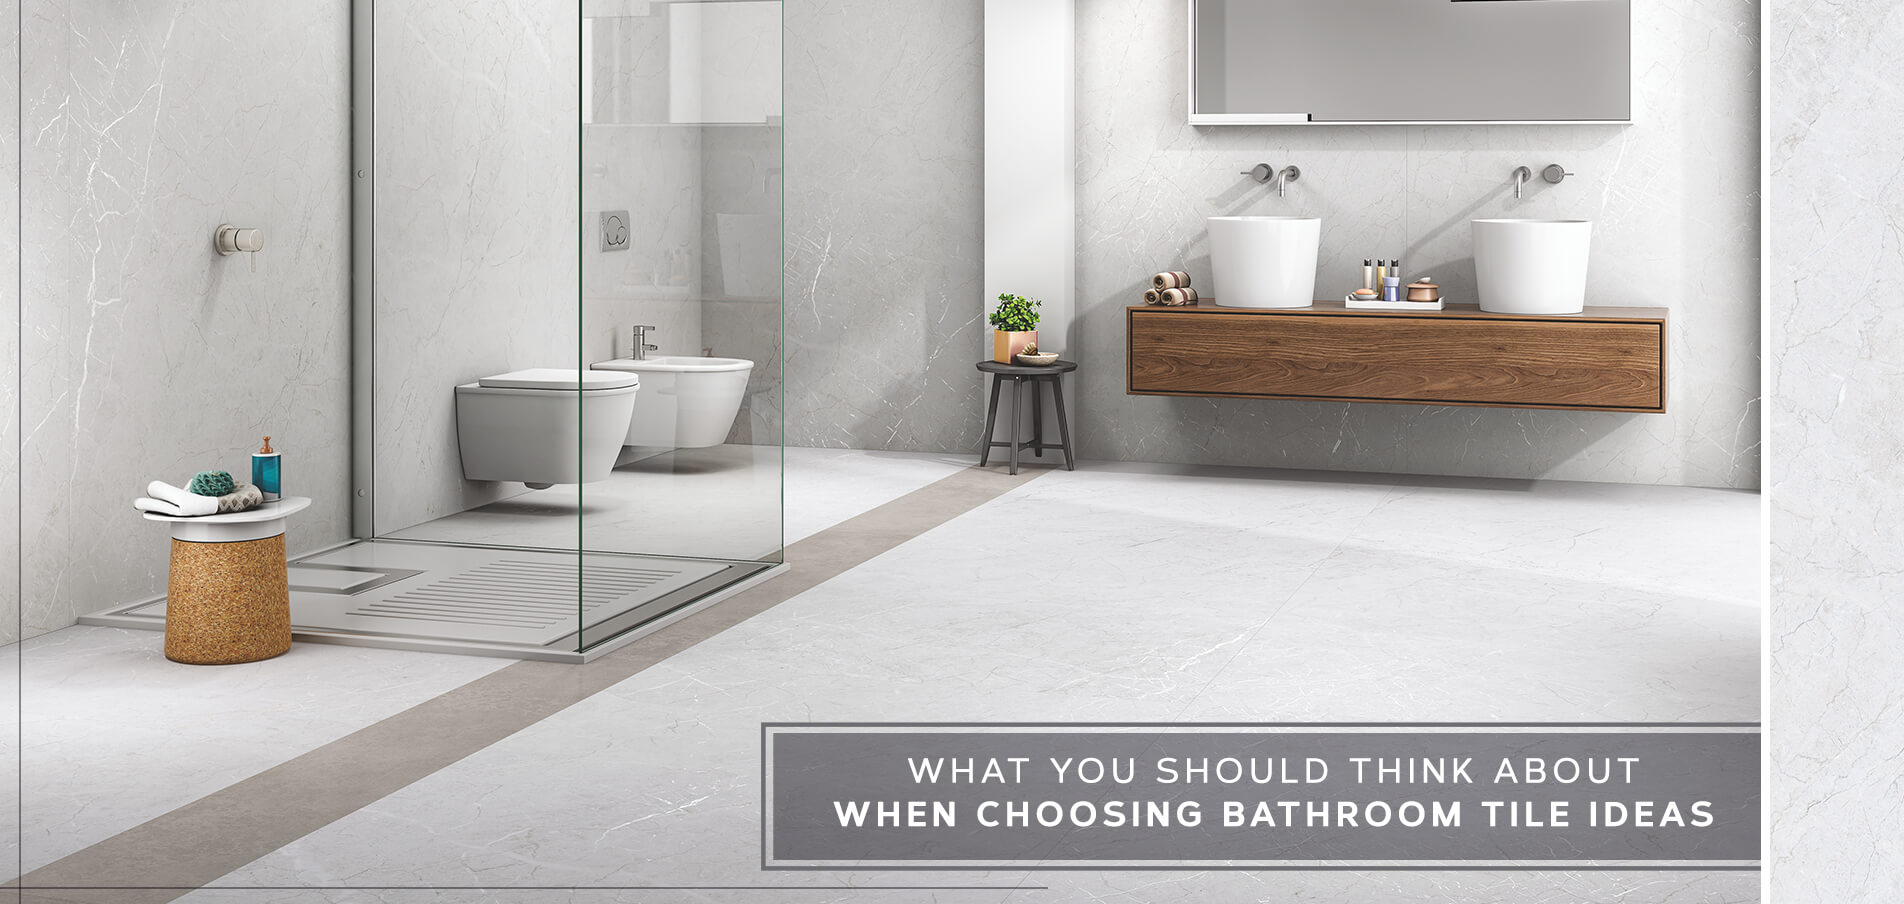 What You Should Think About When Choosing Bathroom Tile Ideas